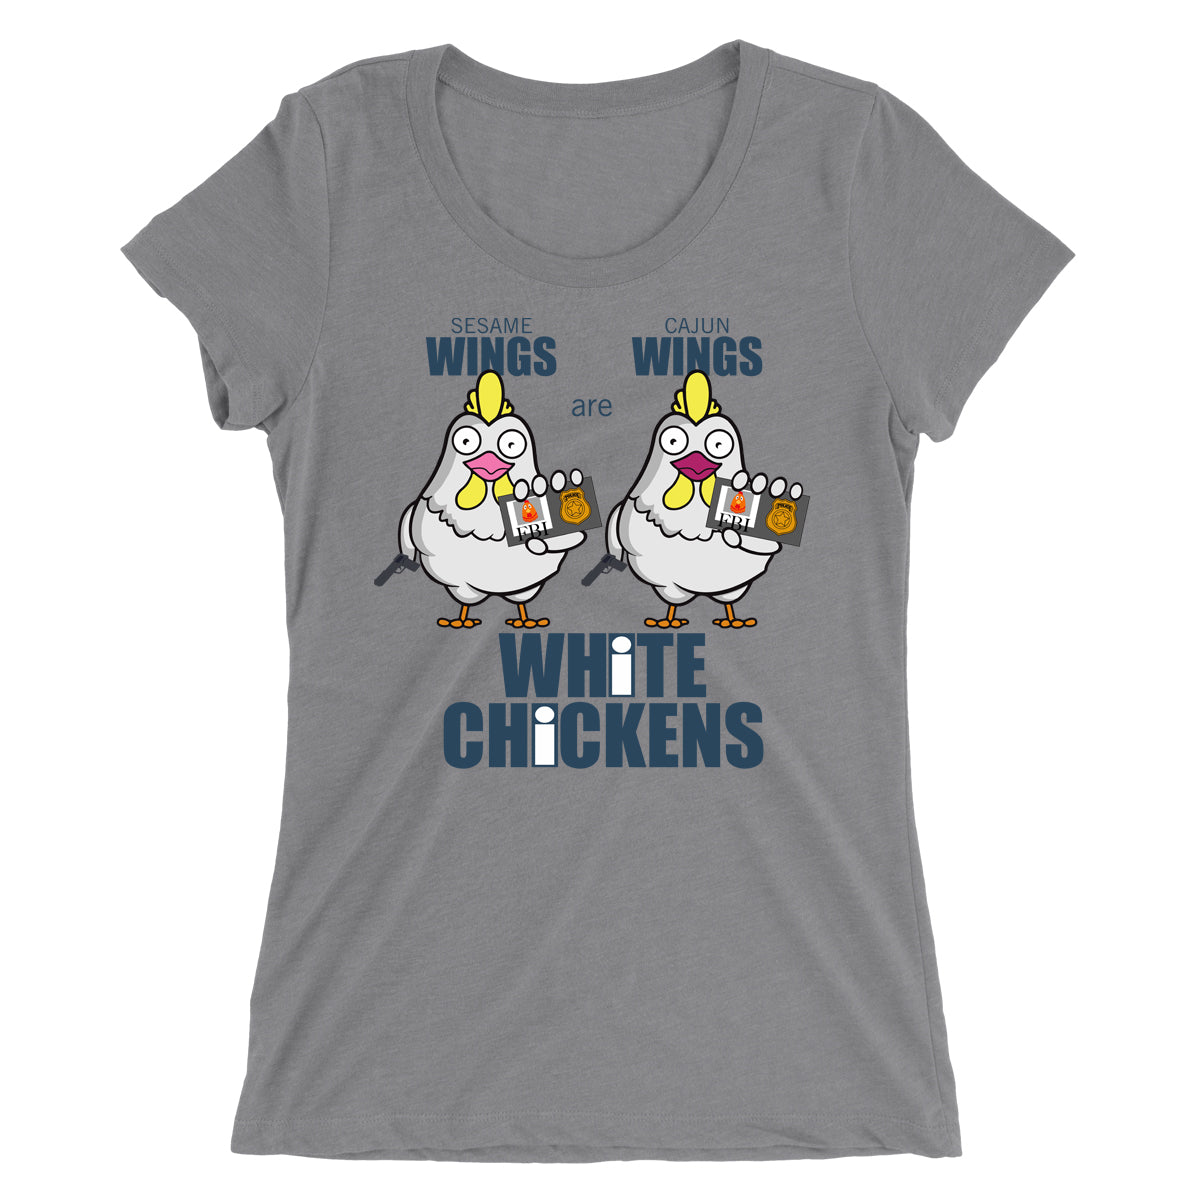 Movie The Food - White Chickens - Women's T-Shirt - Heather Grey